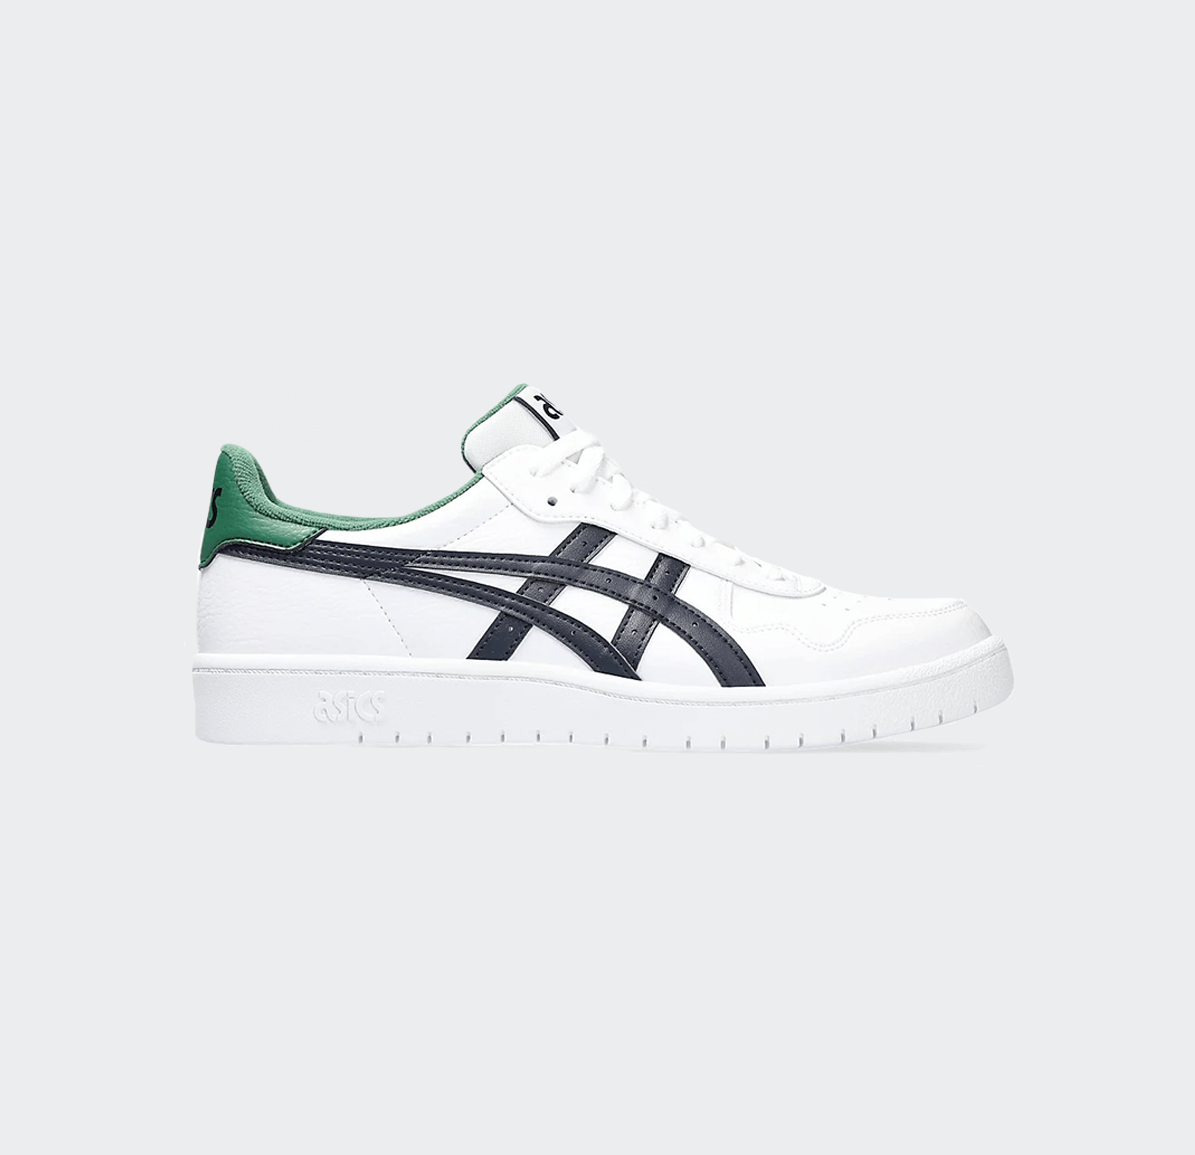 Asics SportStyle Japan S - White/Midnight/Green - Asics SportStyle - State Of Play